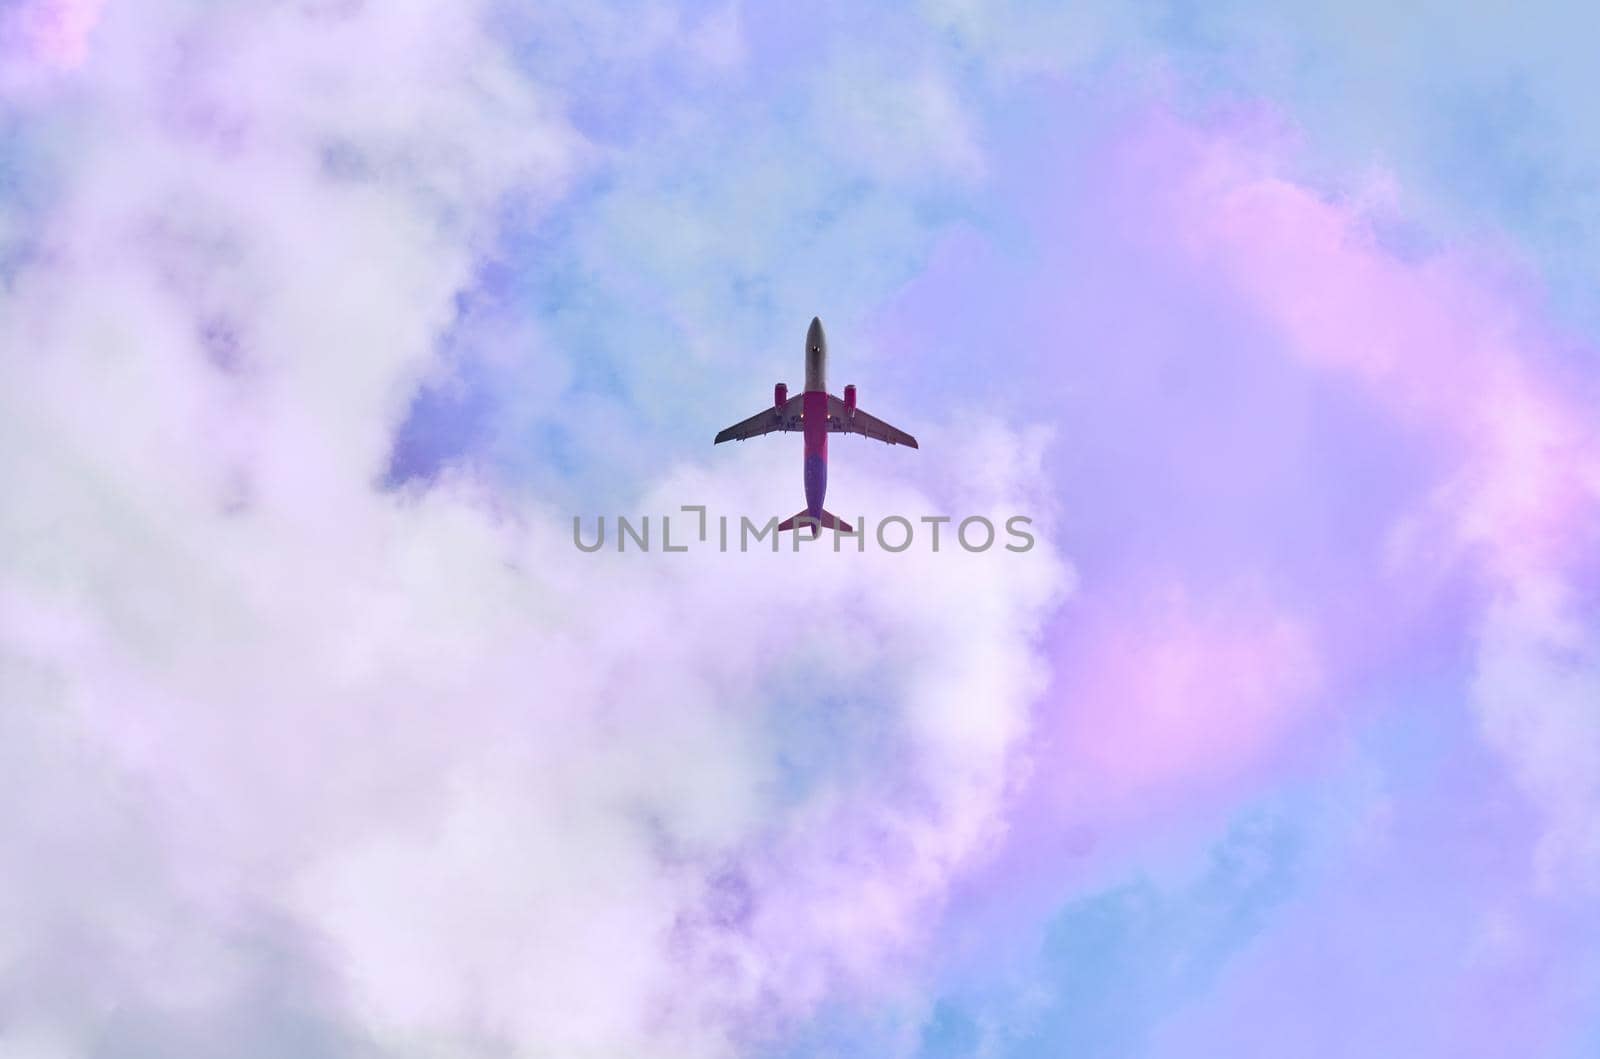 a flat surface on which a straight line joining any two points on it would wholly lie. Red passenger plane in blue sky with pink clouds